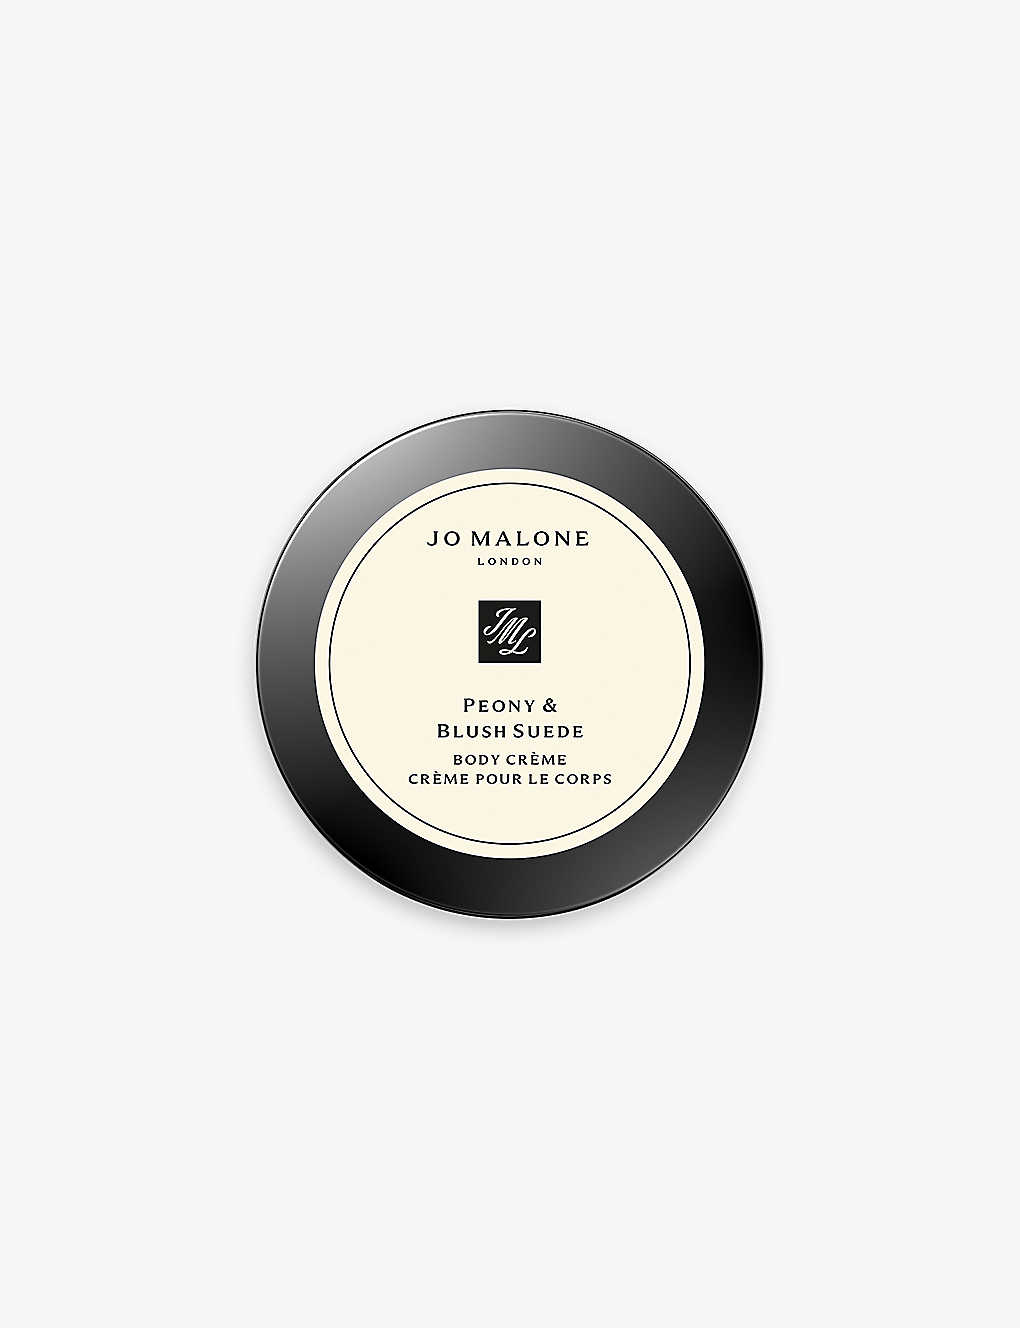 Jo Malone London Peony & Blush Suede Body Crème, 50ml - One Size In Colorless